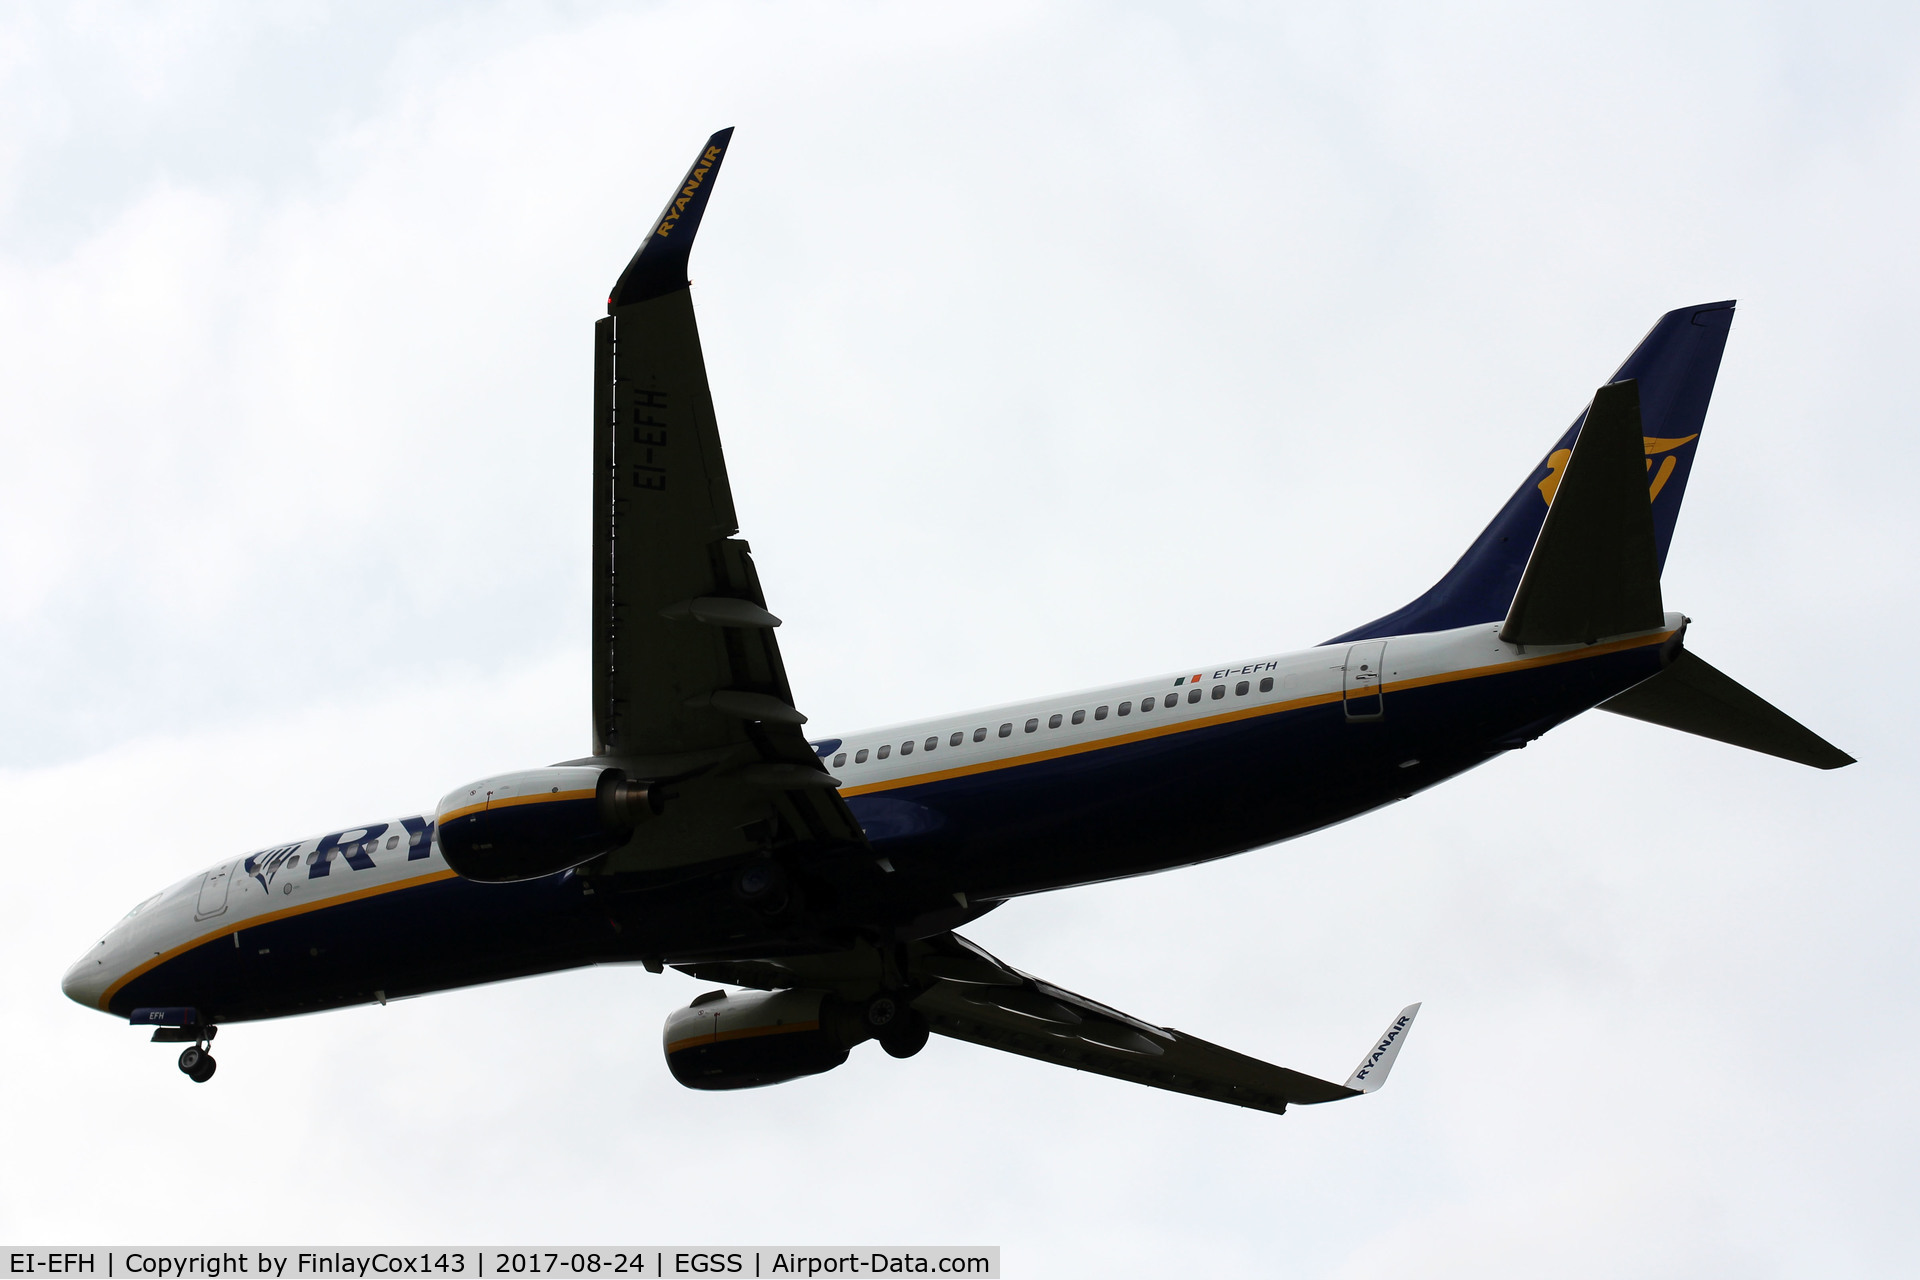 EI-EFH, 2009 Boeing 737-8AS C/N 35012, Landing at London Stansted (STN) from Carcassonne (CCF) as FR75